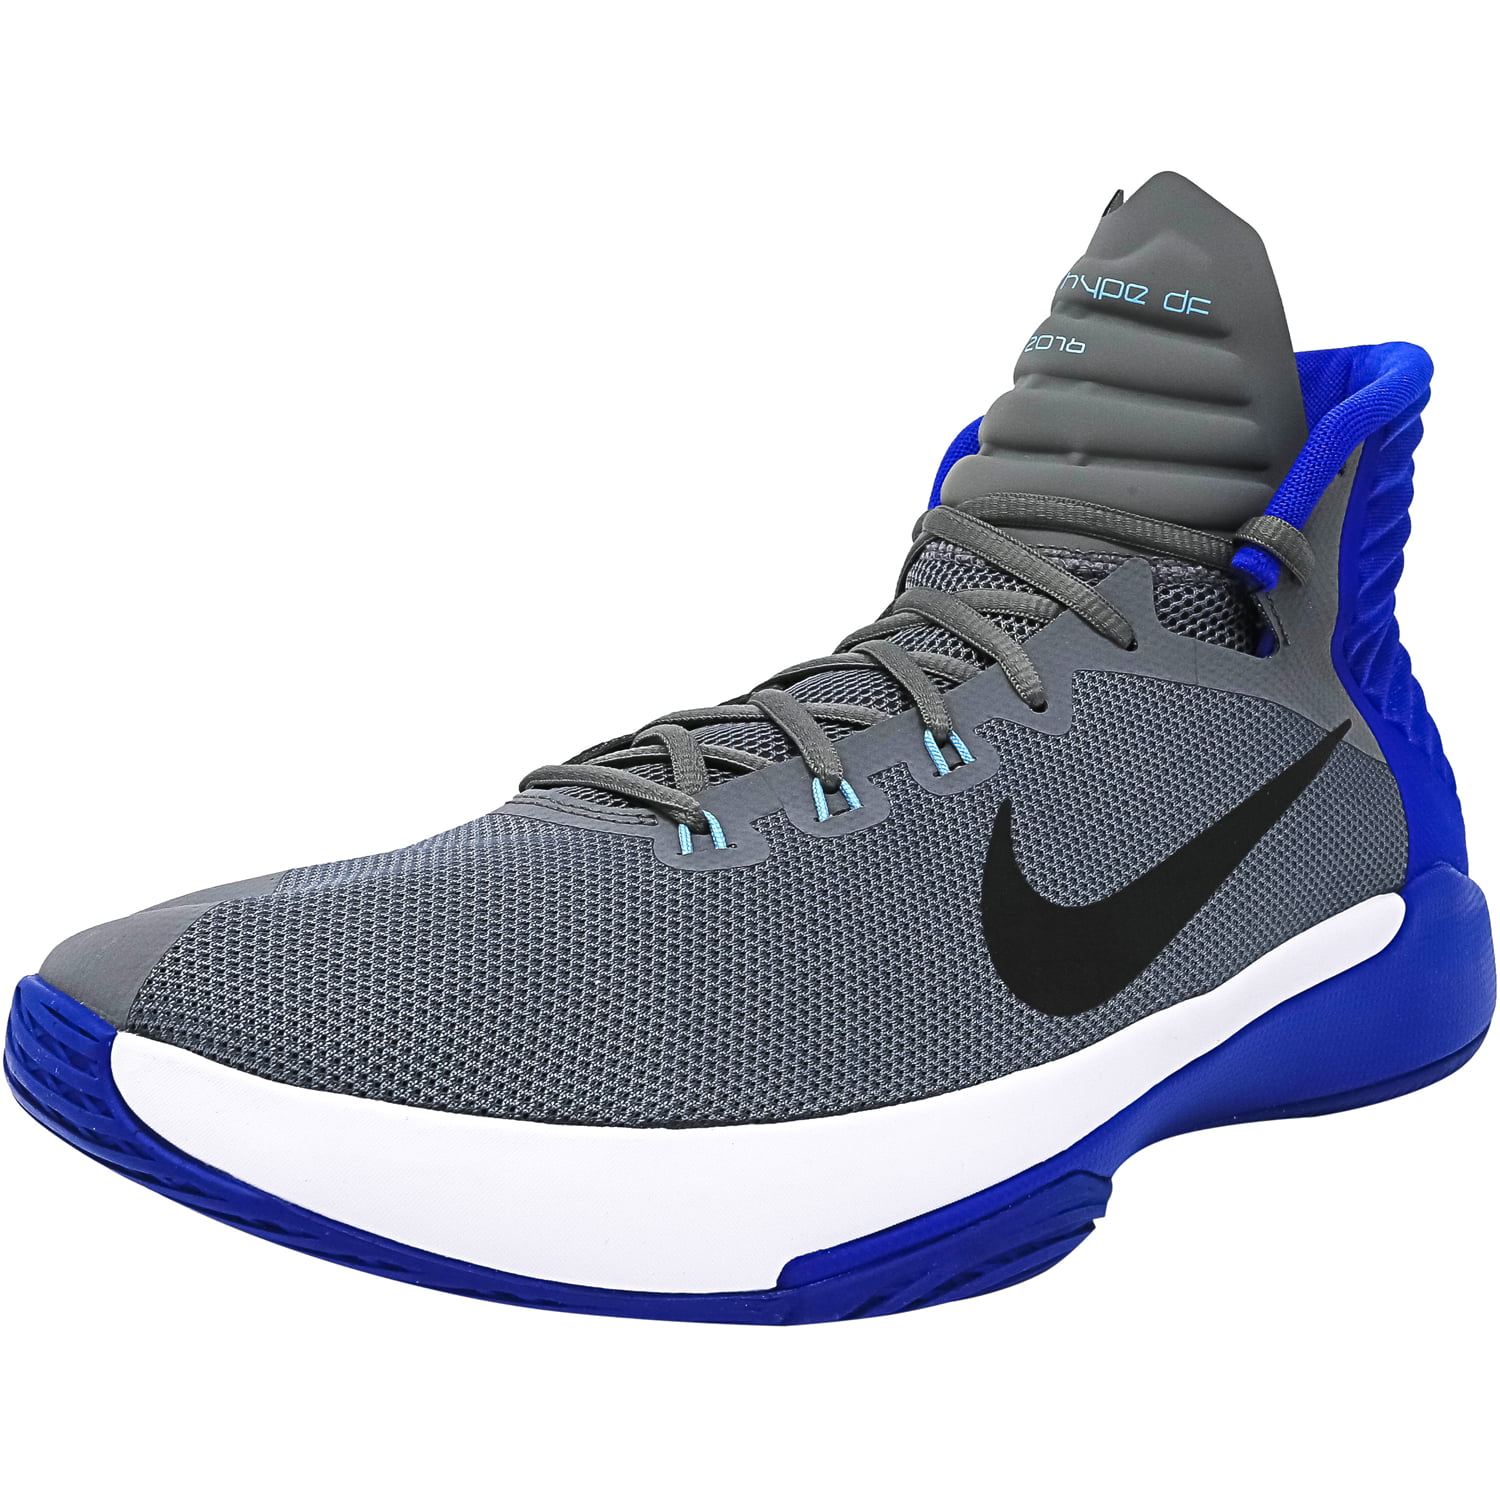 Nike Men's Prime Hype Df 2016 Cool Grey / Anthracite Mid-Top Basketball ...